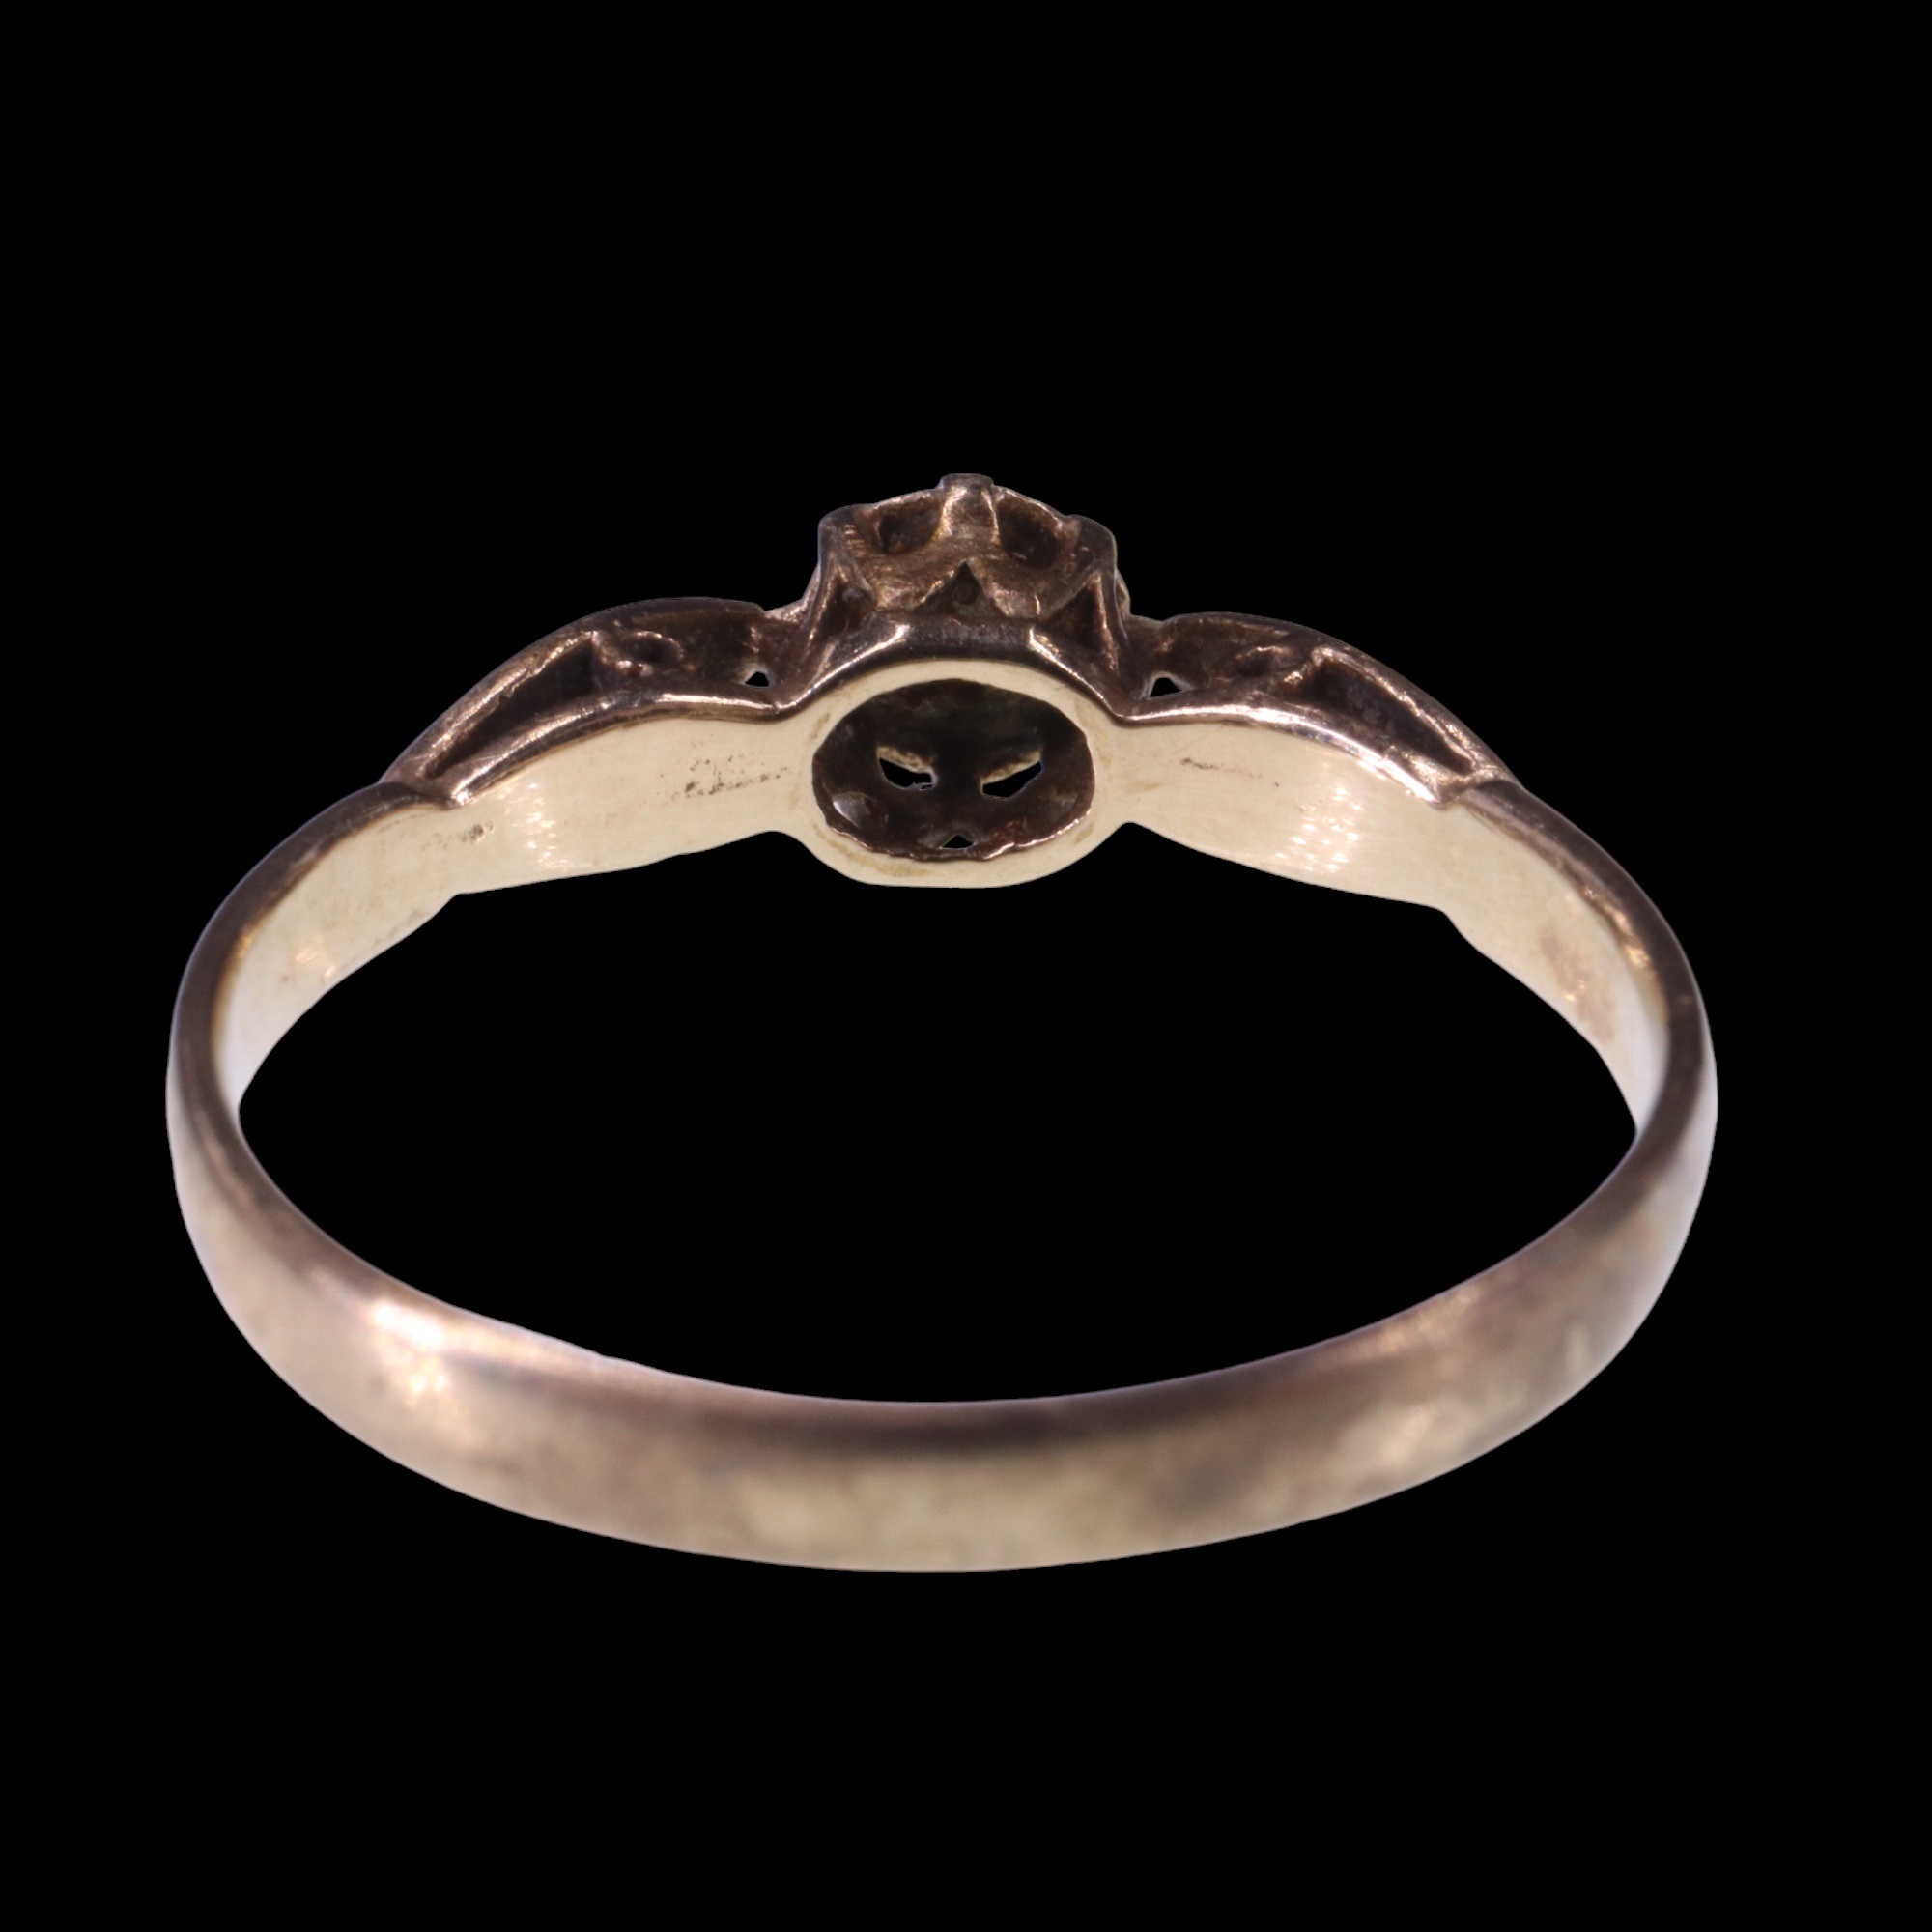 A solitaire diamond ring, having an illusion set 2.5 mm diamond brilliant set on an open gallery - Image 9 of 9